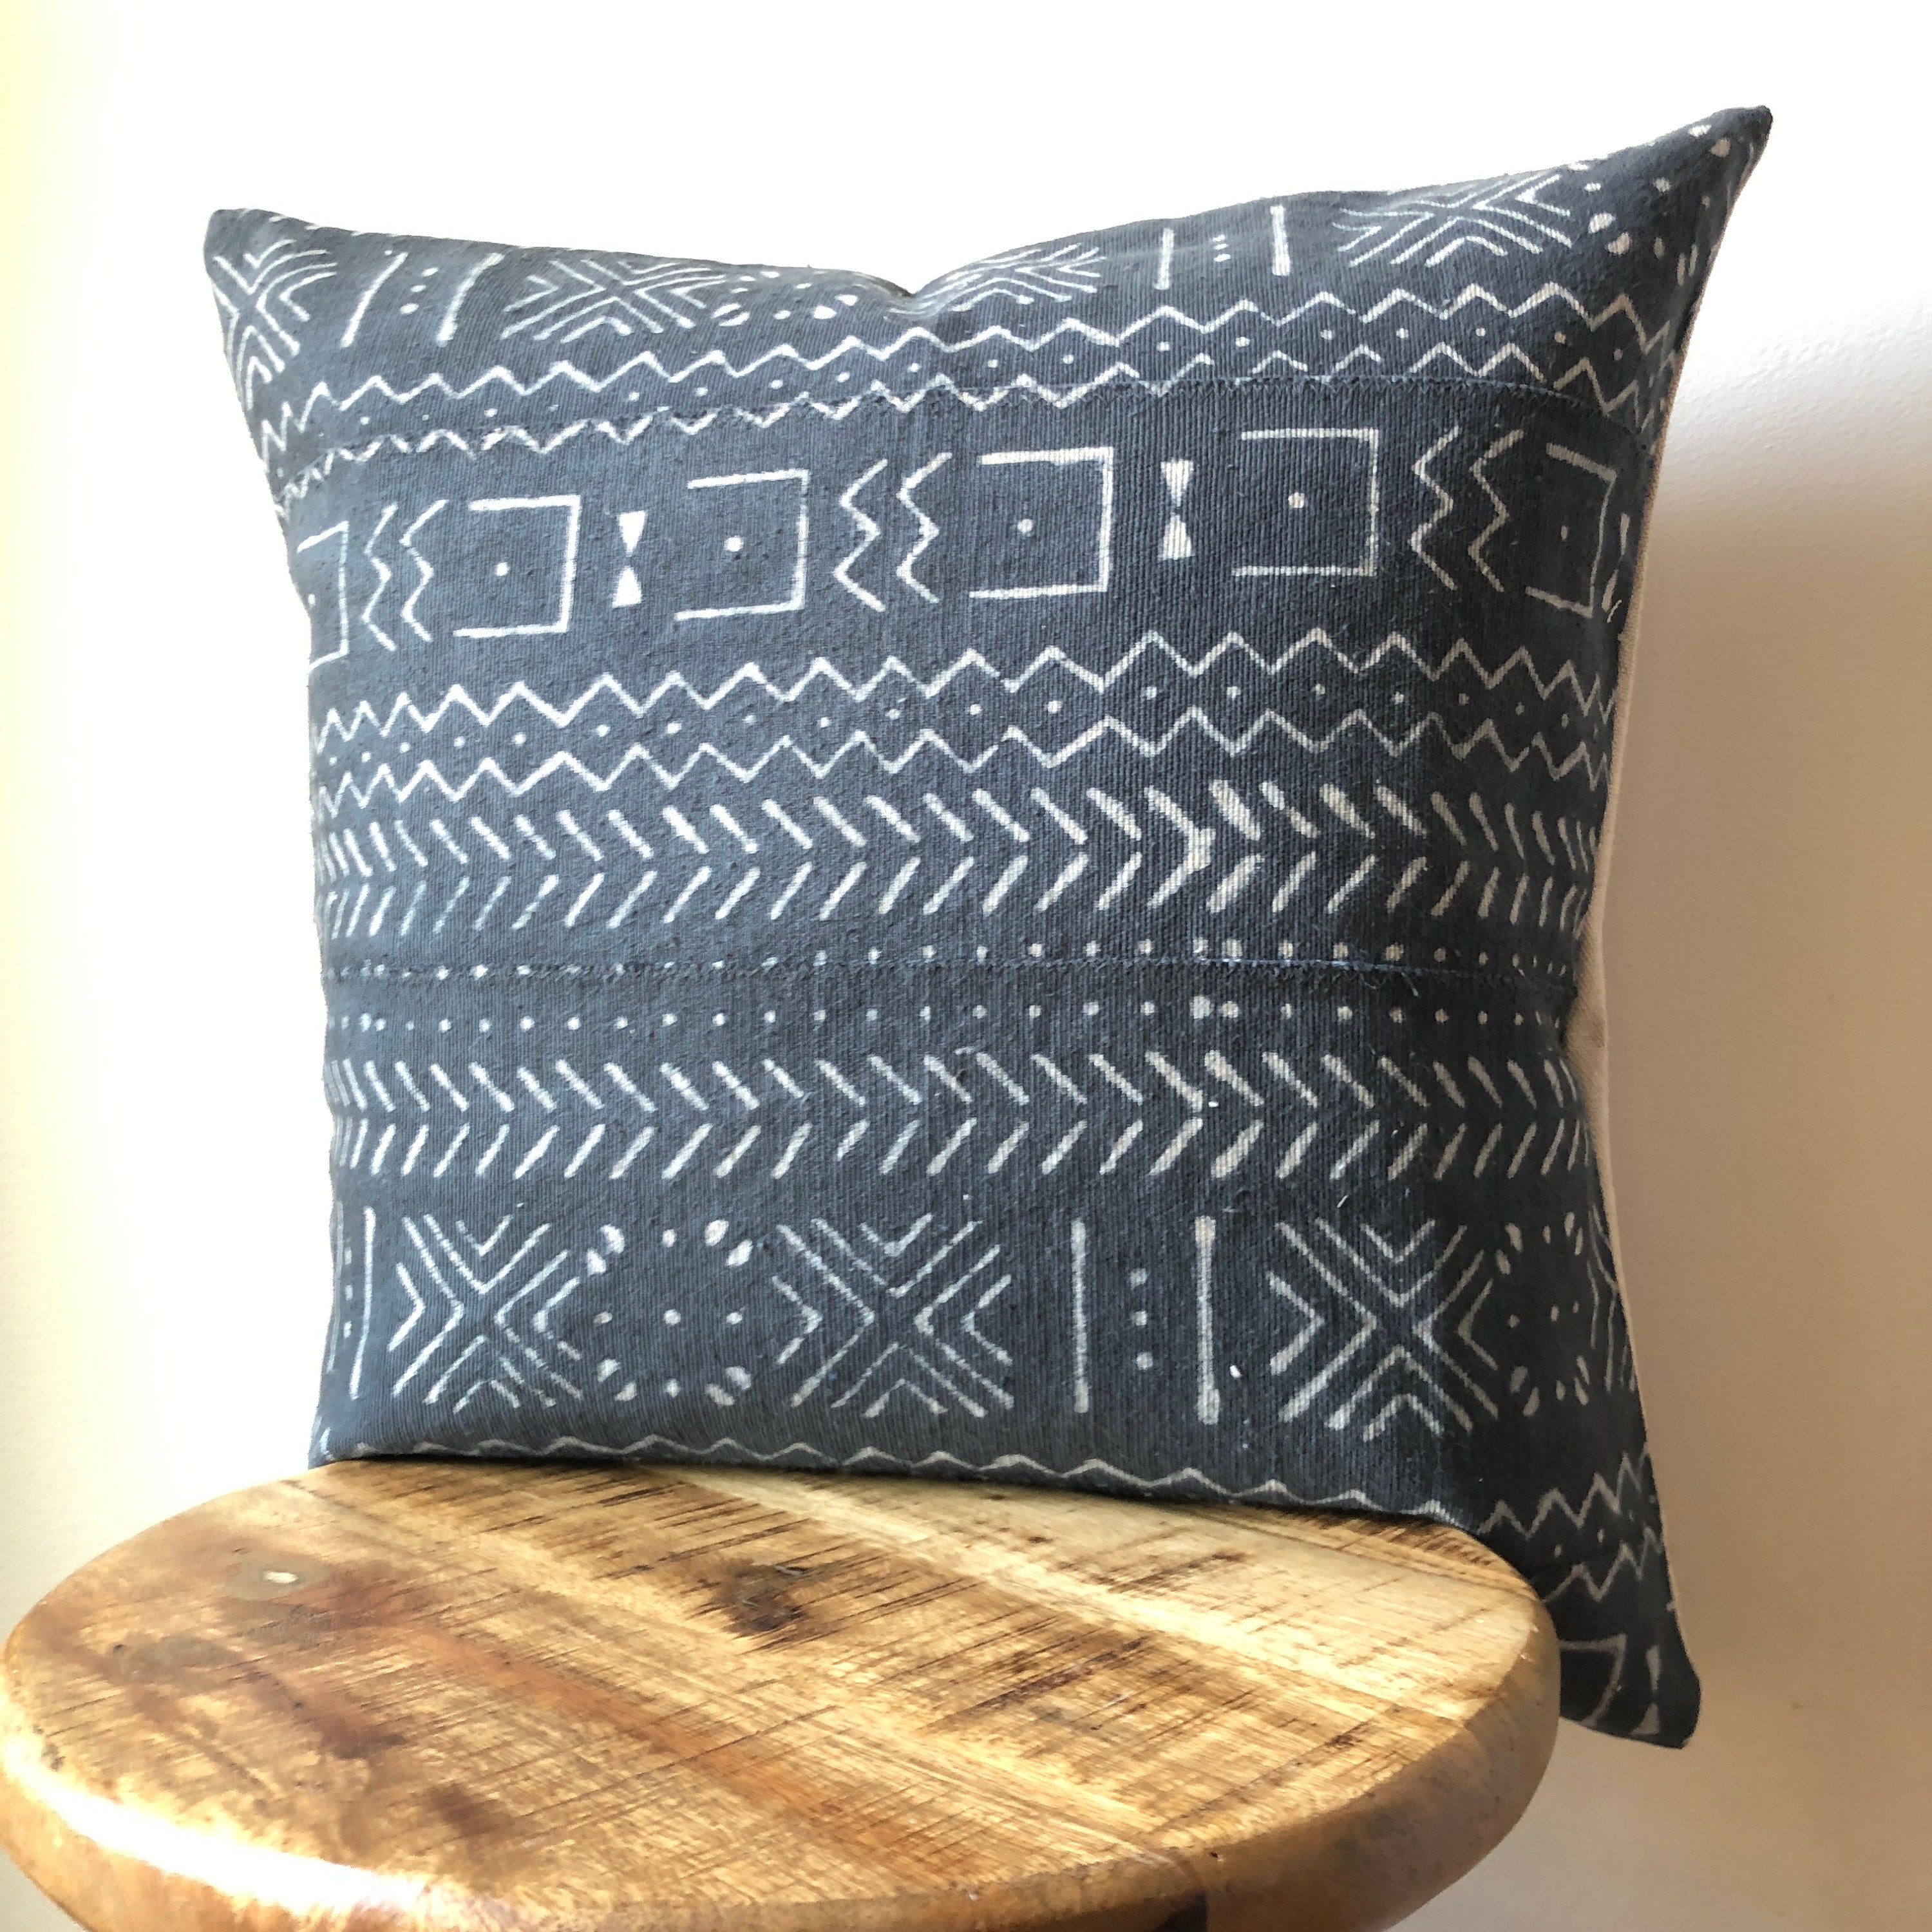 White With Black Tribal Print Mudcloth Style Pillow - Etsy